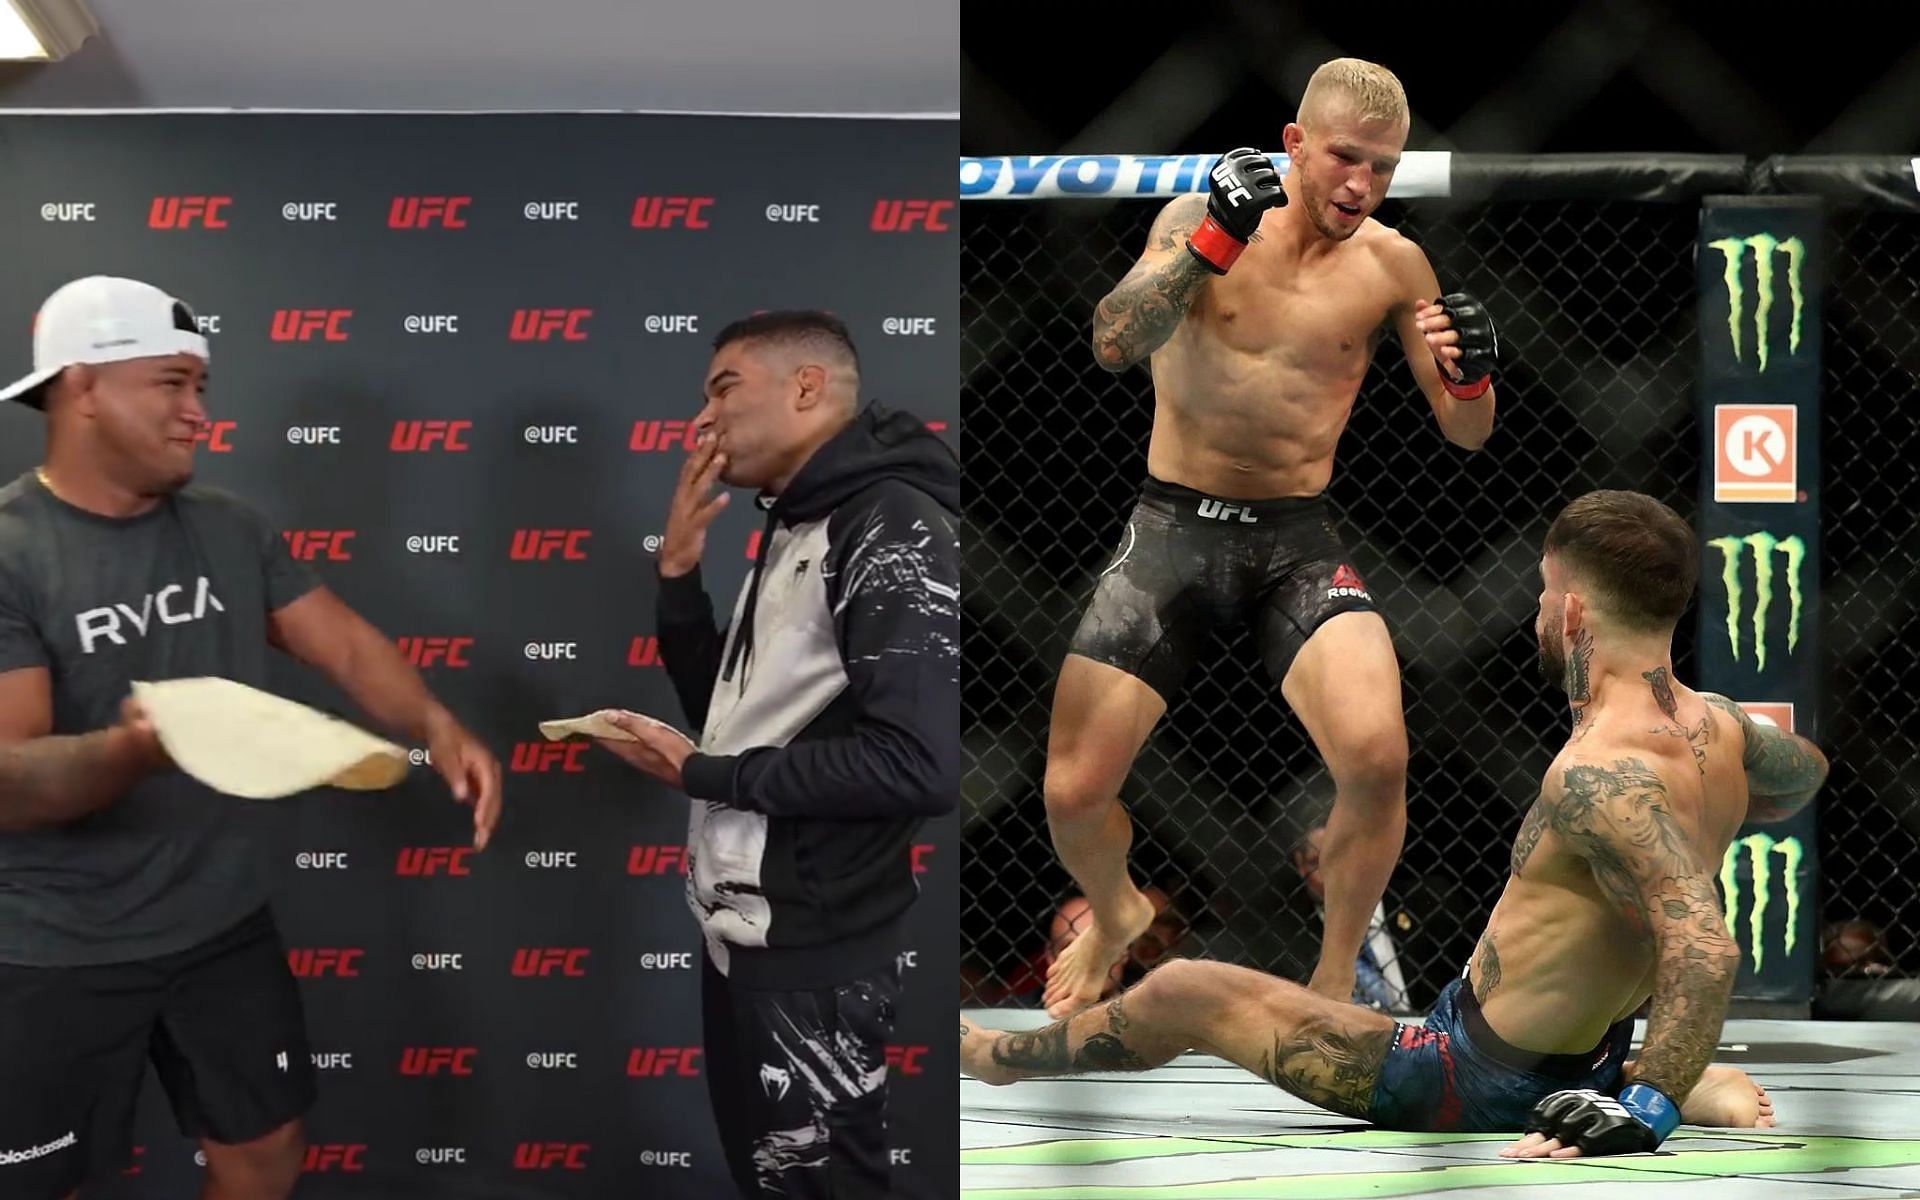 Gilbert Burns and Herbert Burns playing Tortilla challenger (Left) and TJ Dillashaw knocking down Cody Garbrandt (Right) (Images courtesy of @ufc Twitter and Getty)